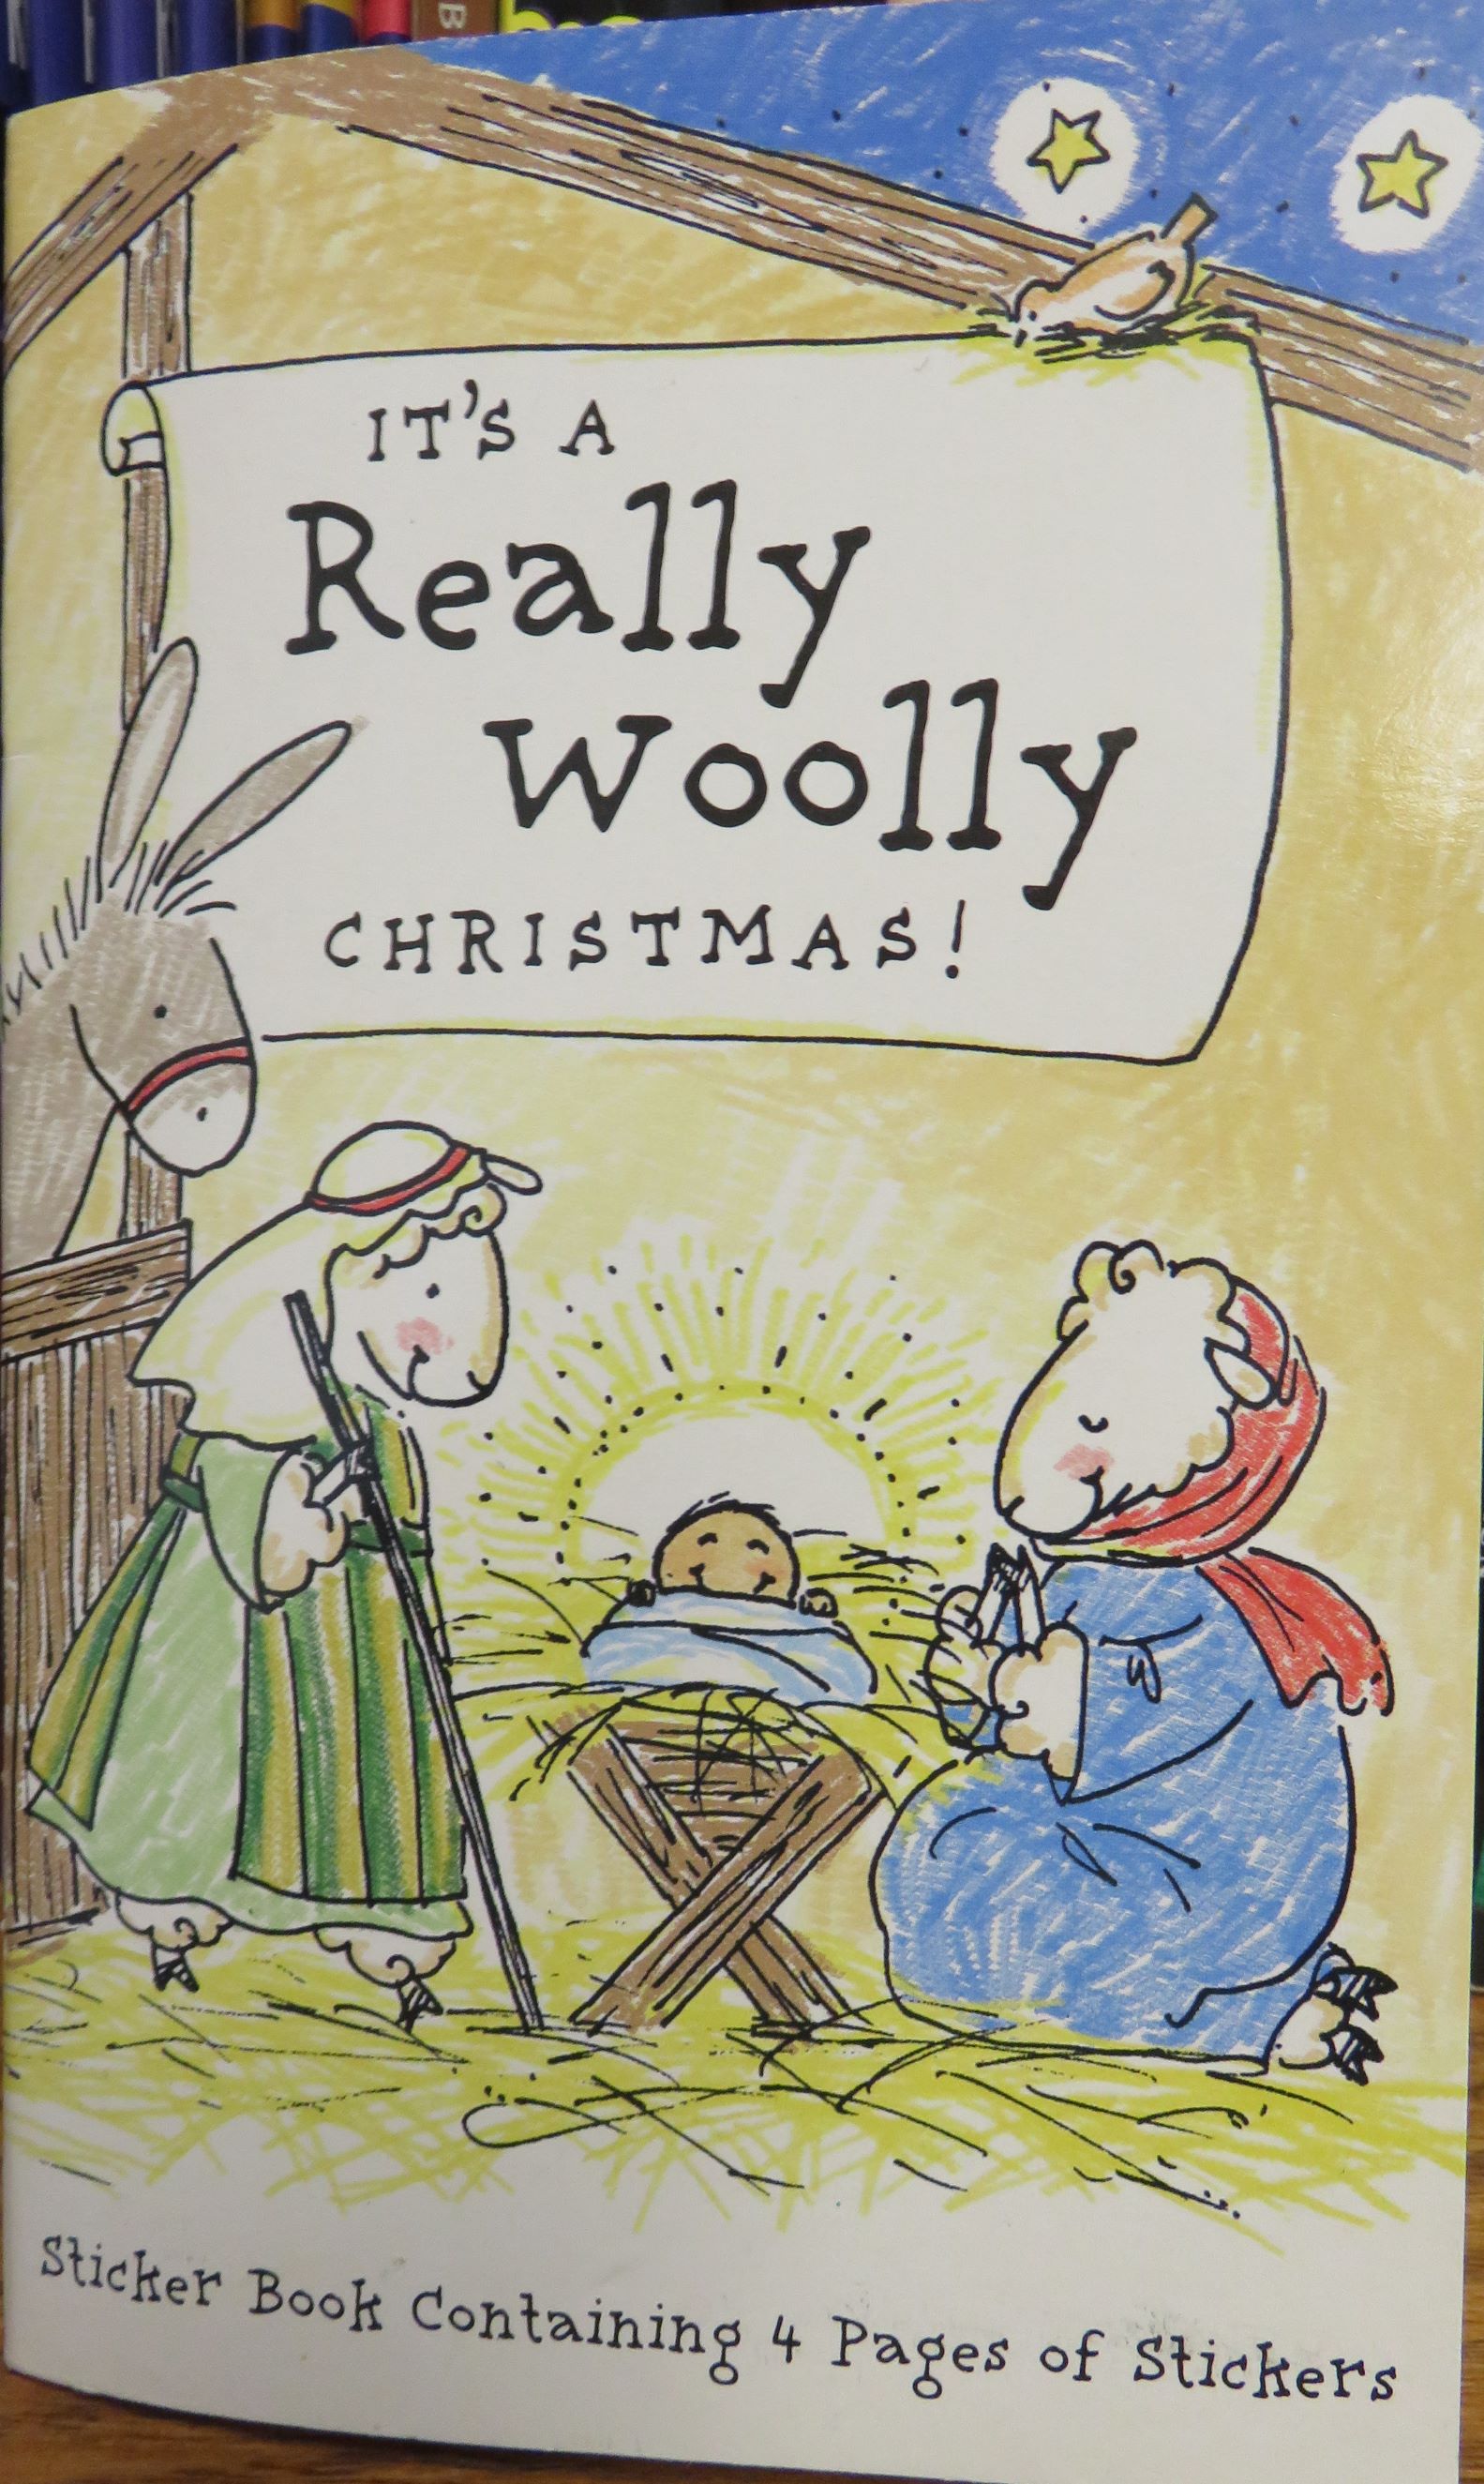 It’s A Really Woolly Christmas!